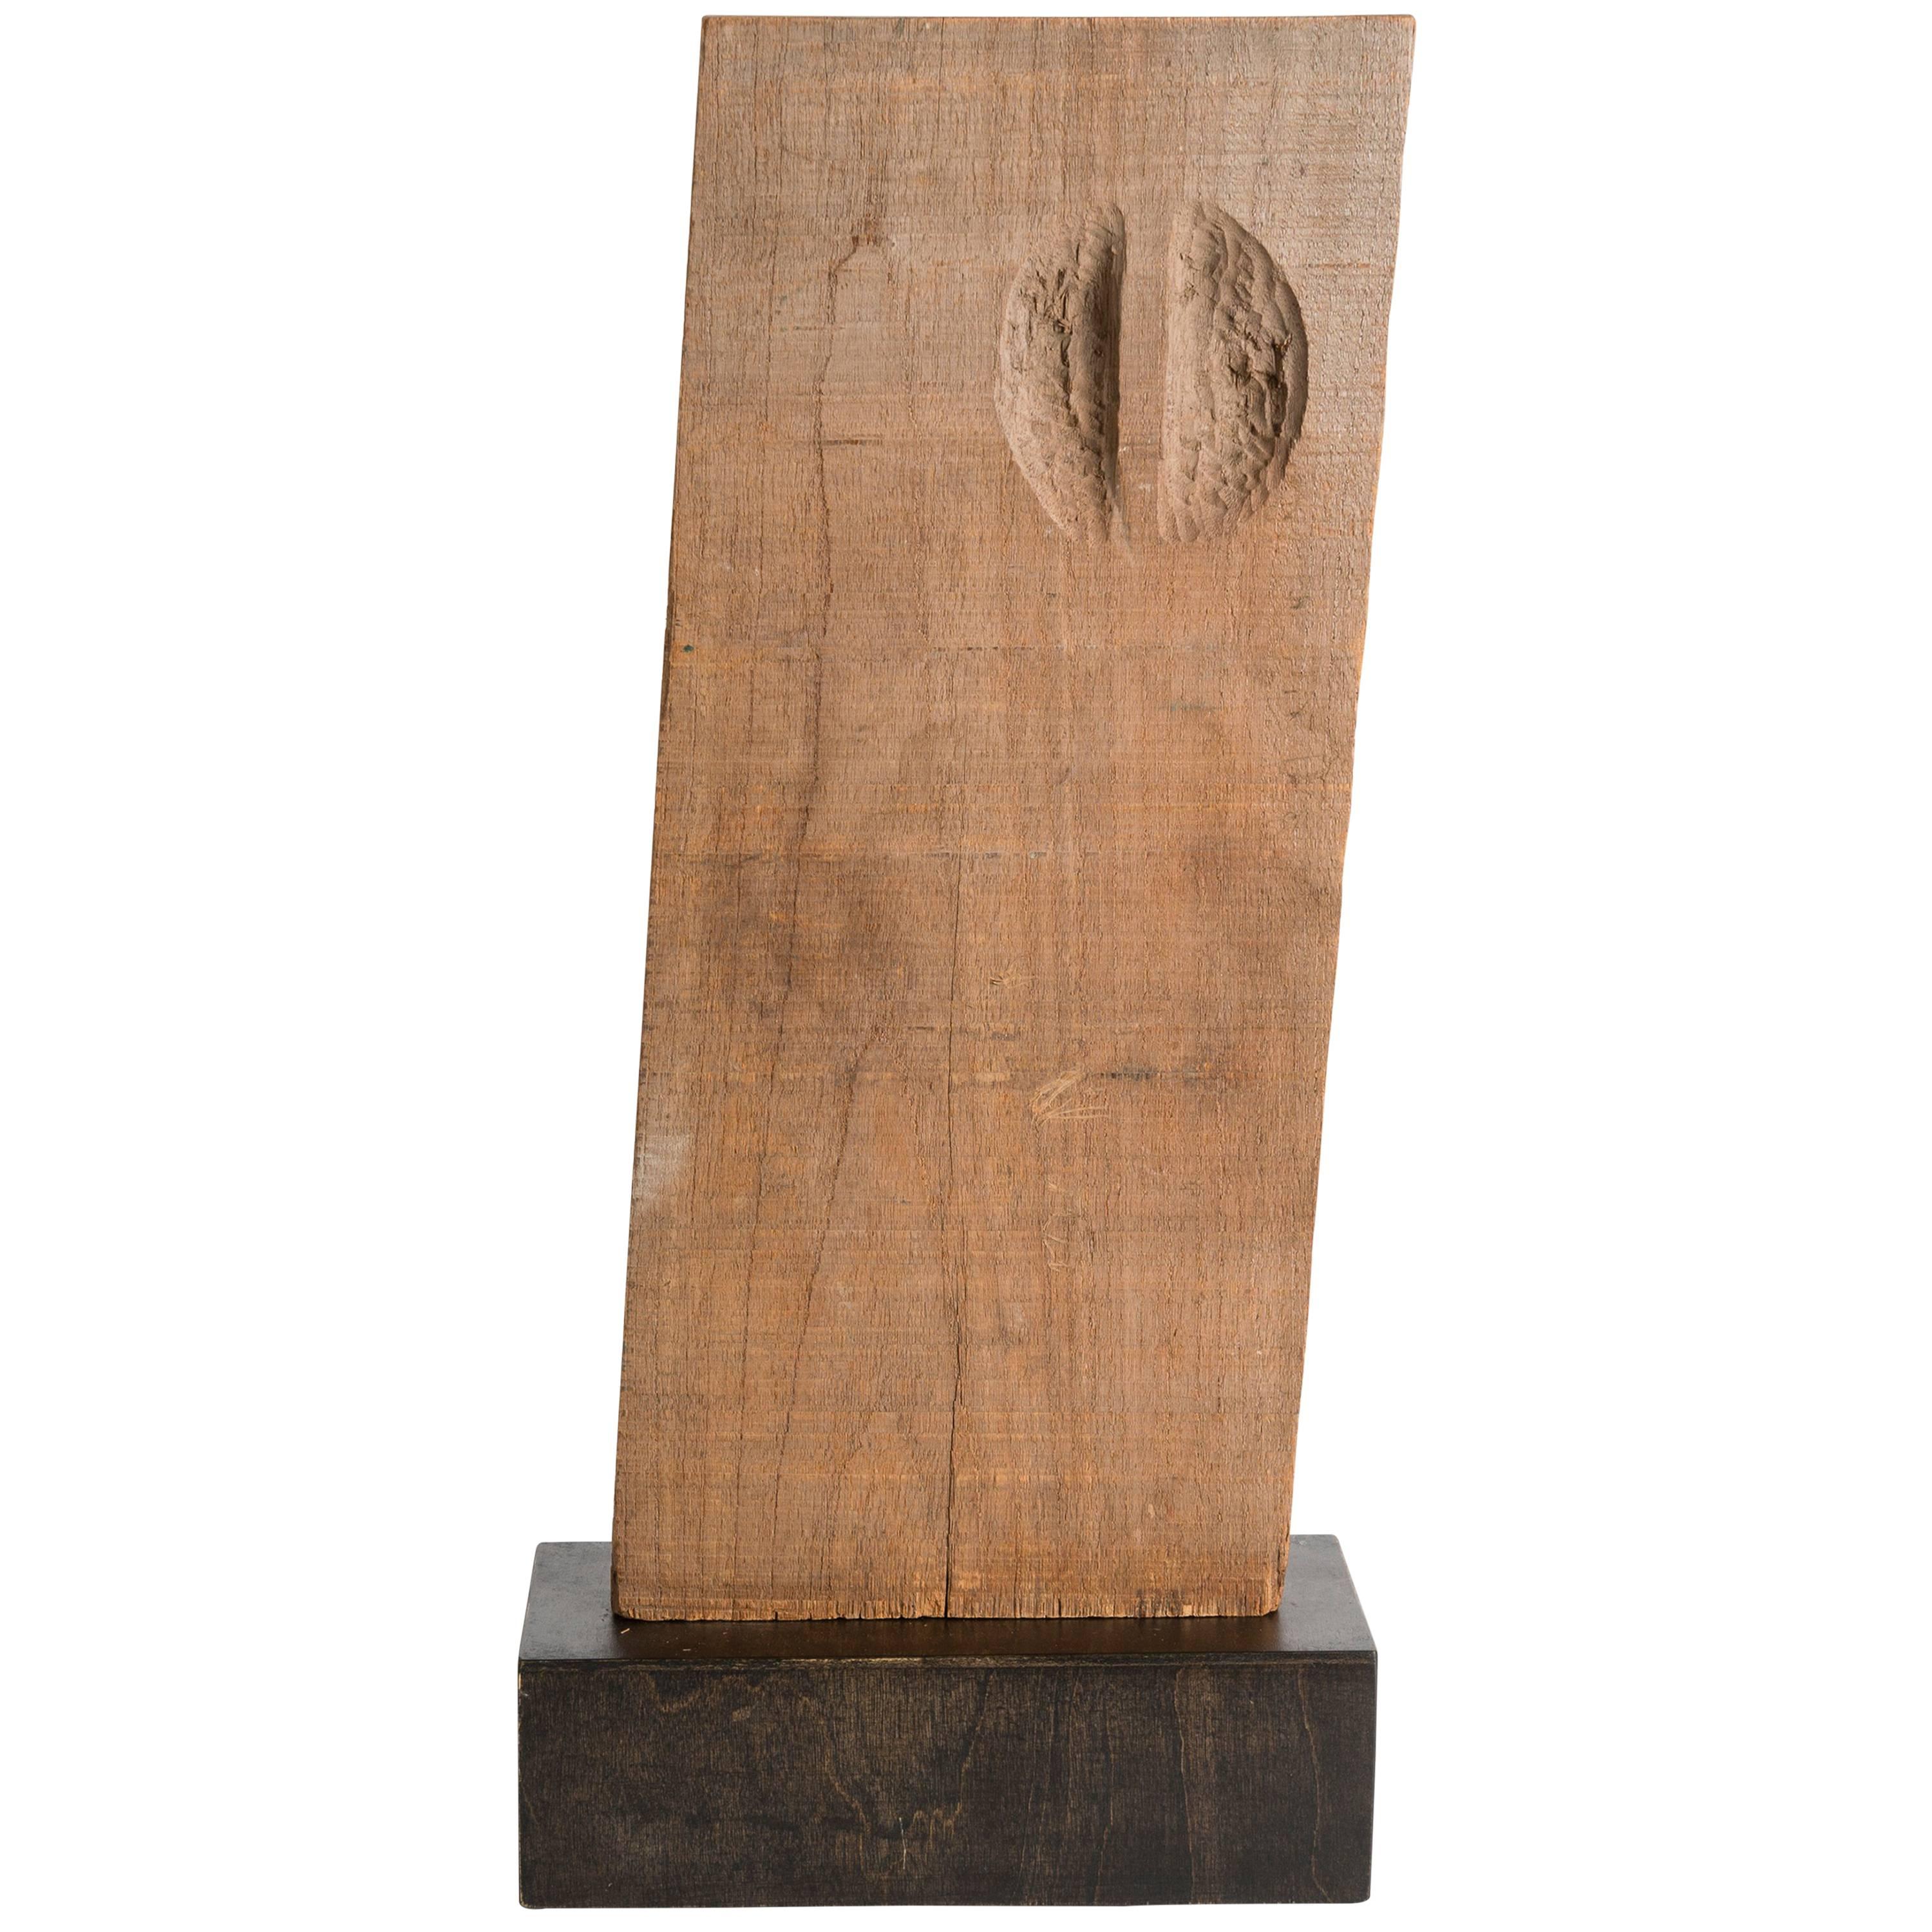 Yongjin Han, a Piece of Wood, Sculpture, United States, 1976